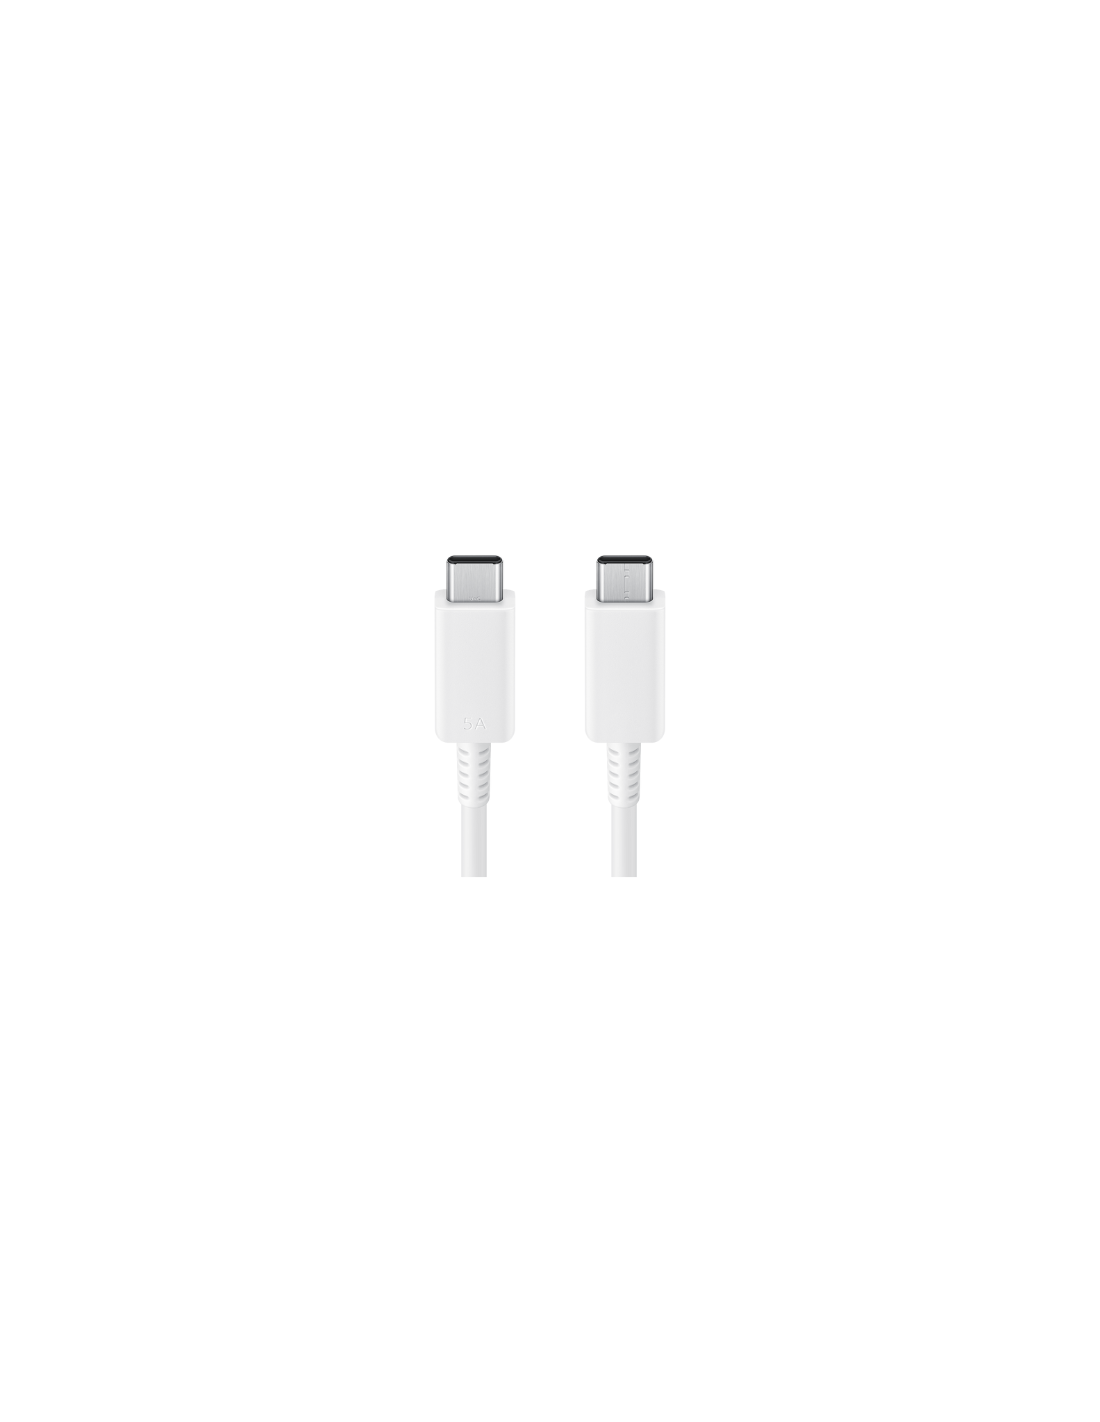 Samsung Cable Usb Tipo C 1.8m Blanco 5A 